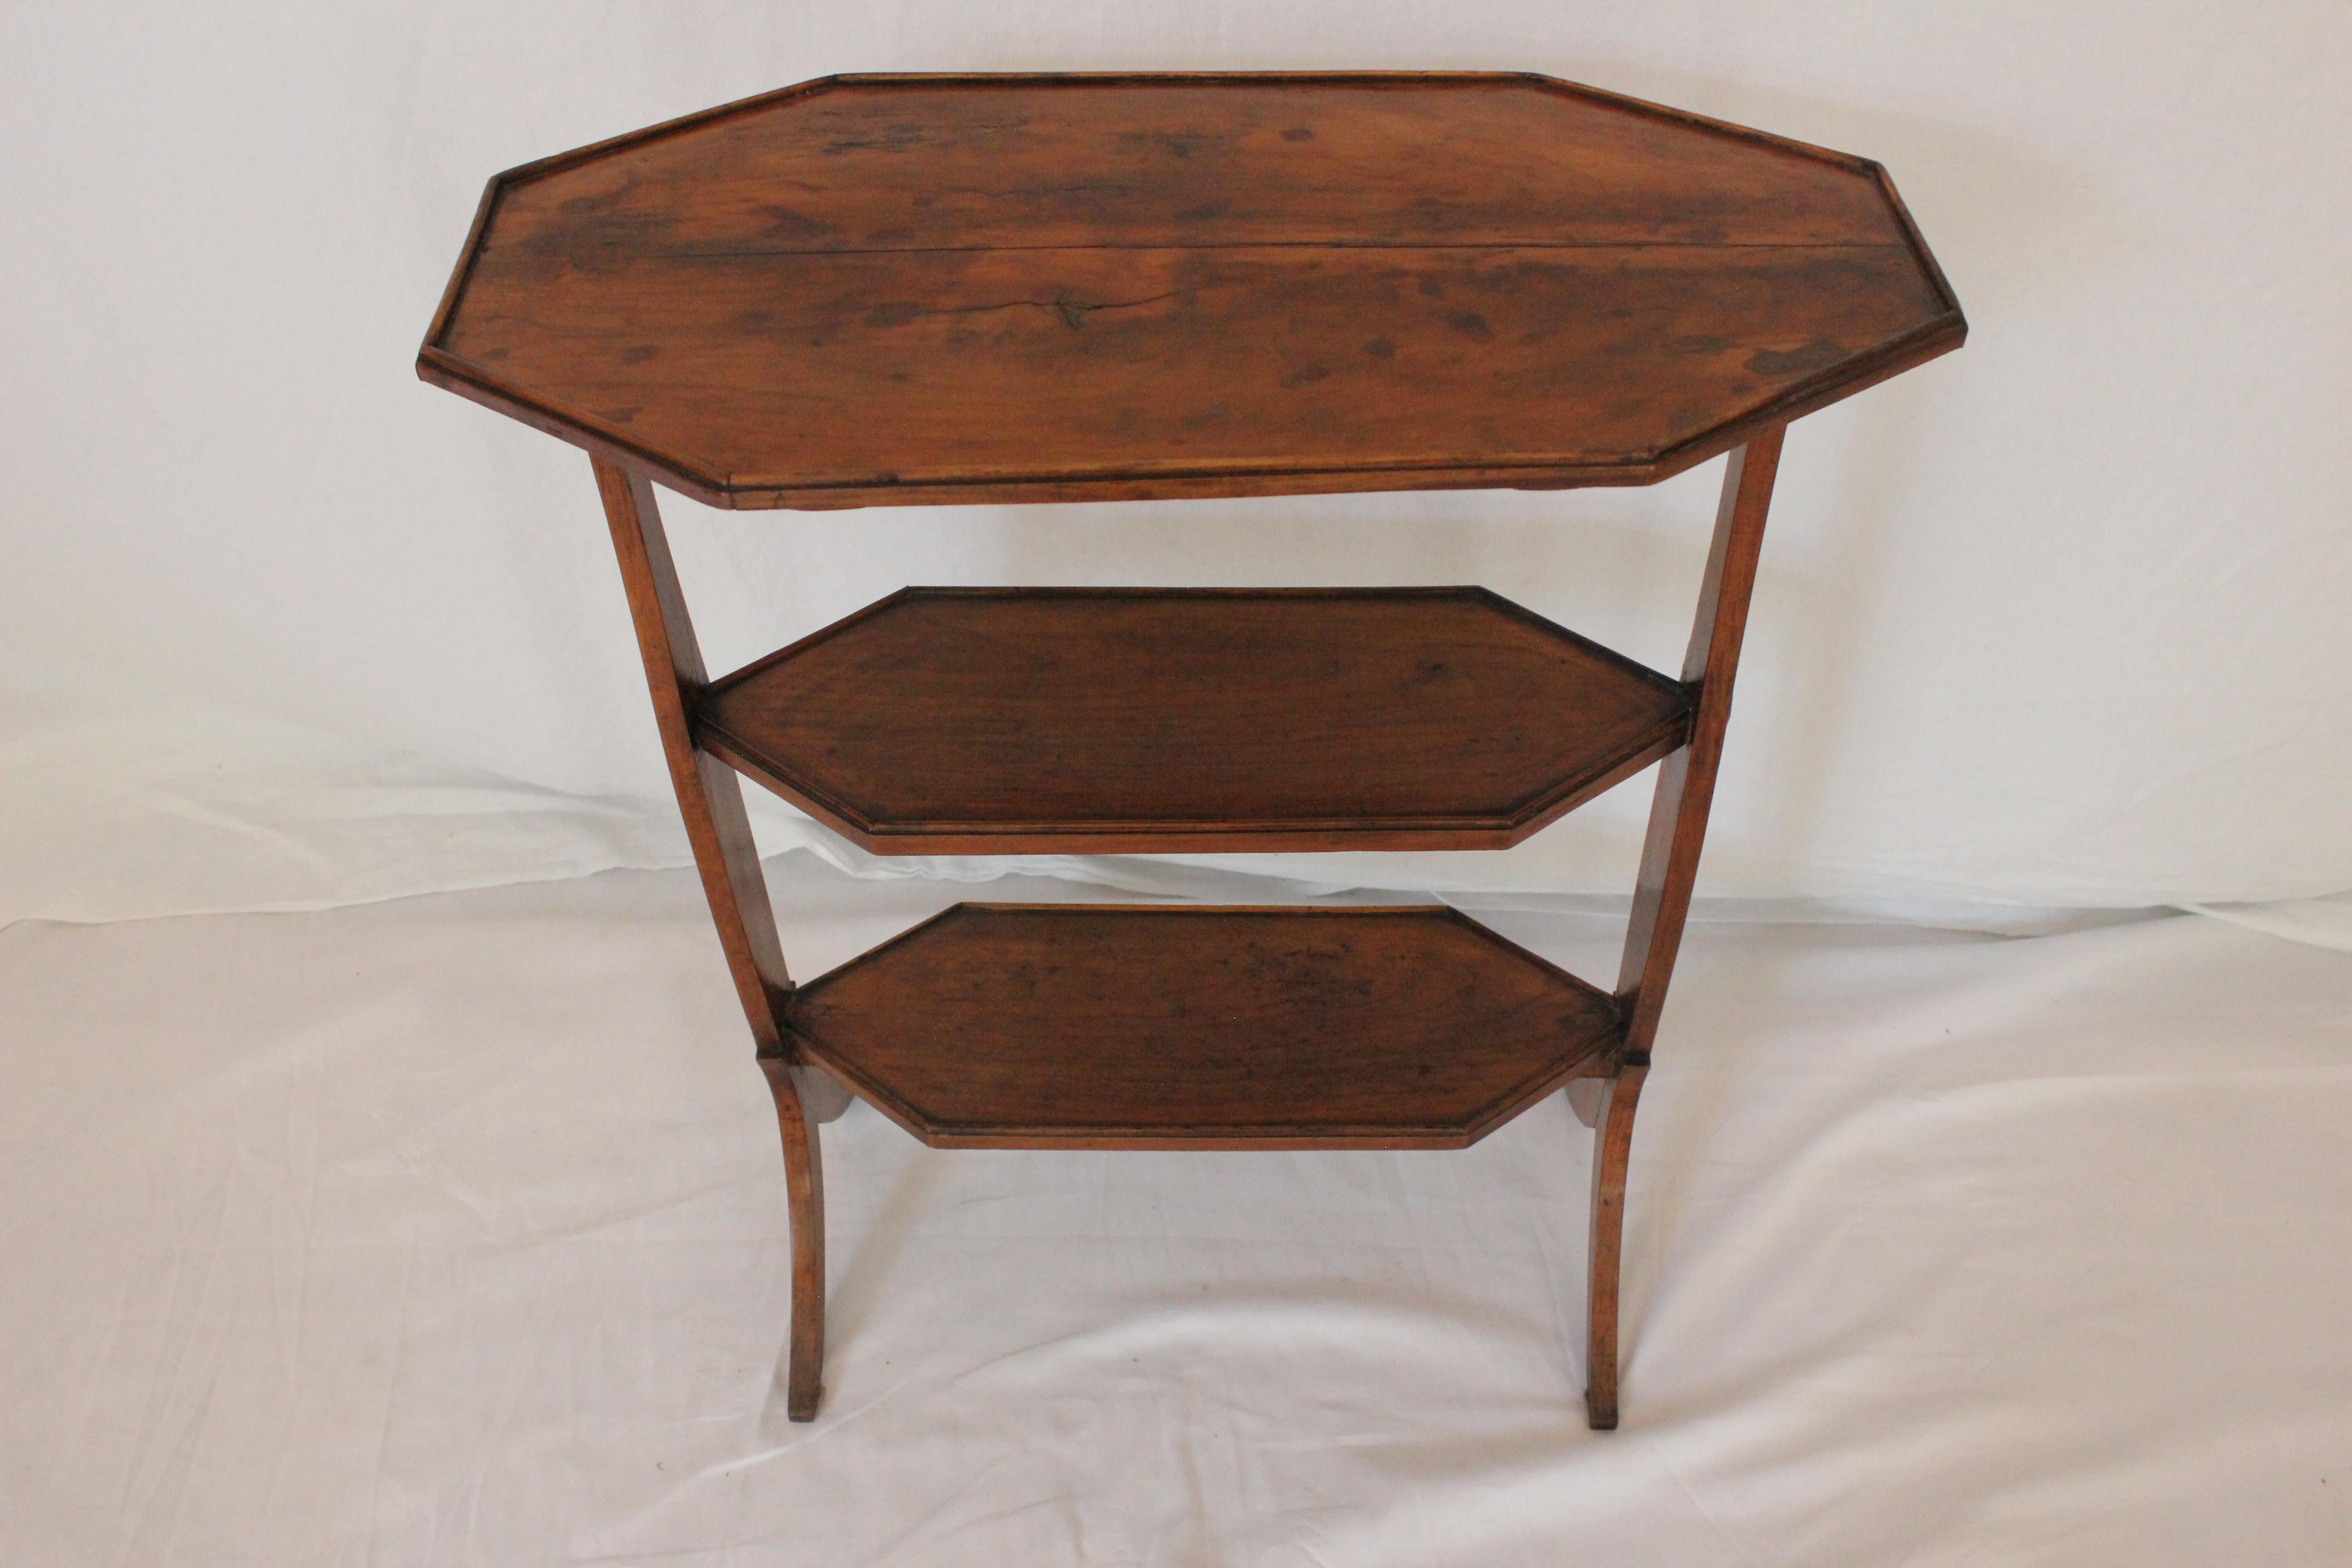 Antique French Provincial Fruitwood Side Table / Display Stand Late 18th C In Good Condition For Sale In Los Angeles, CA